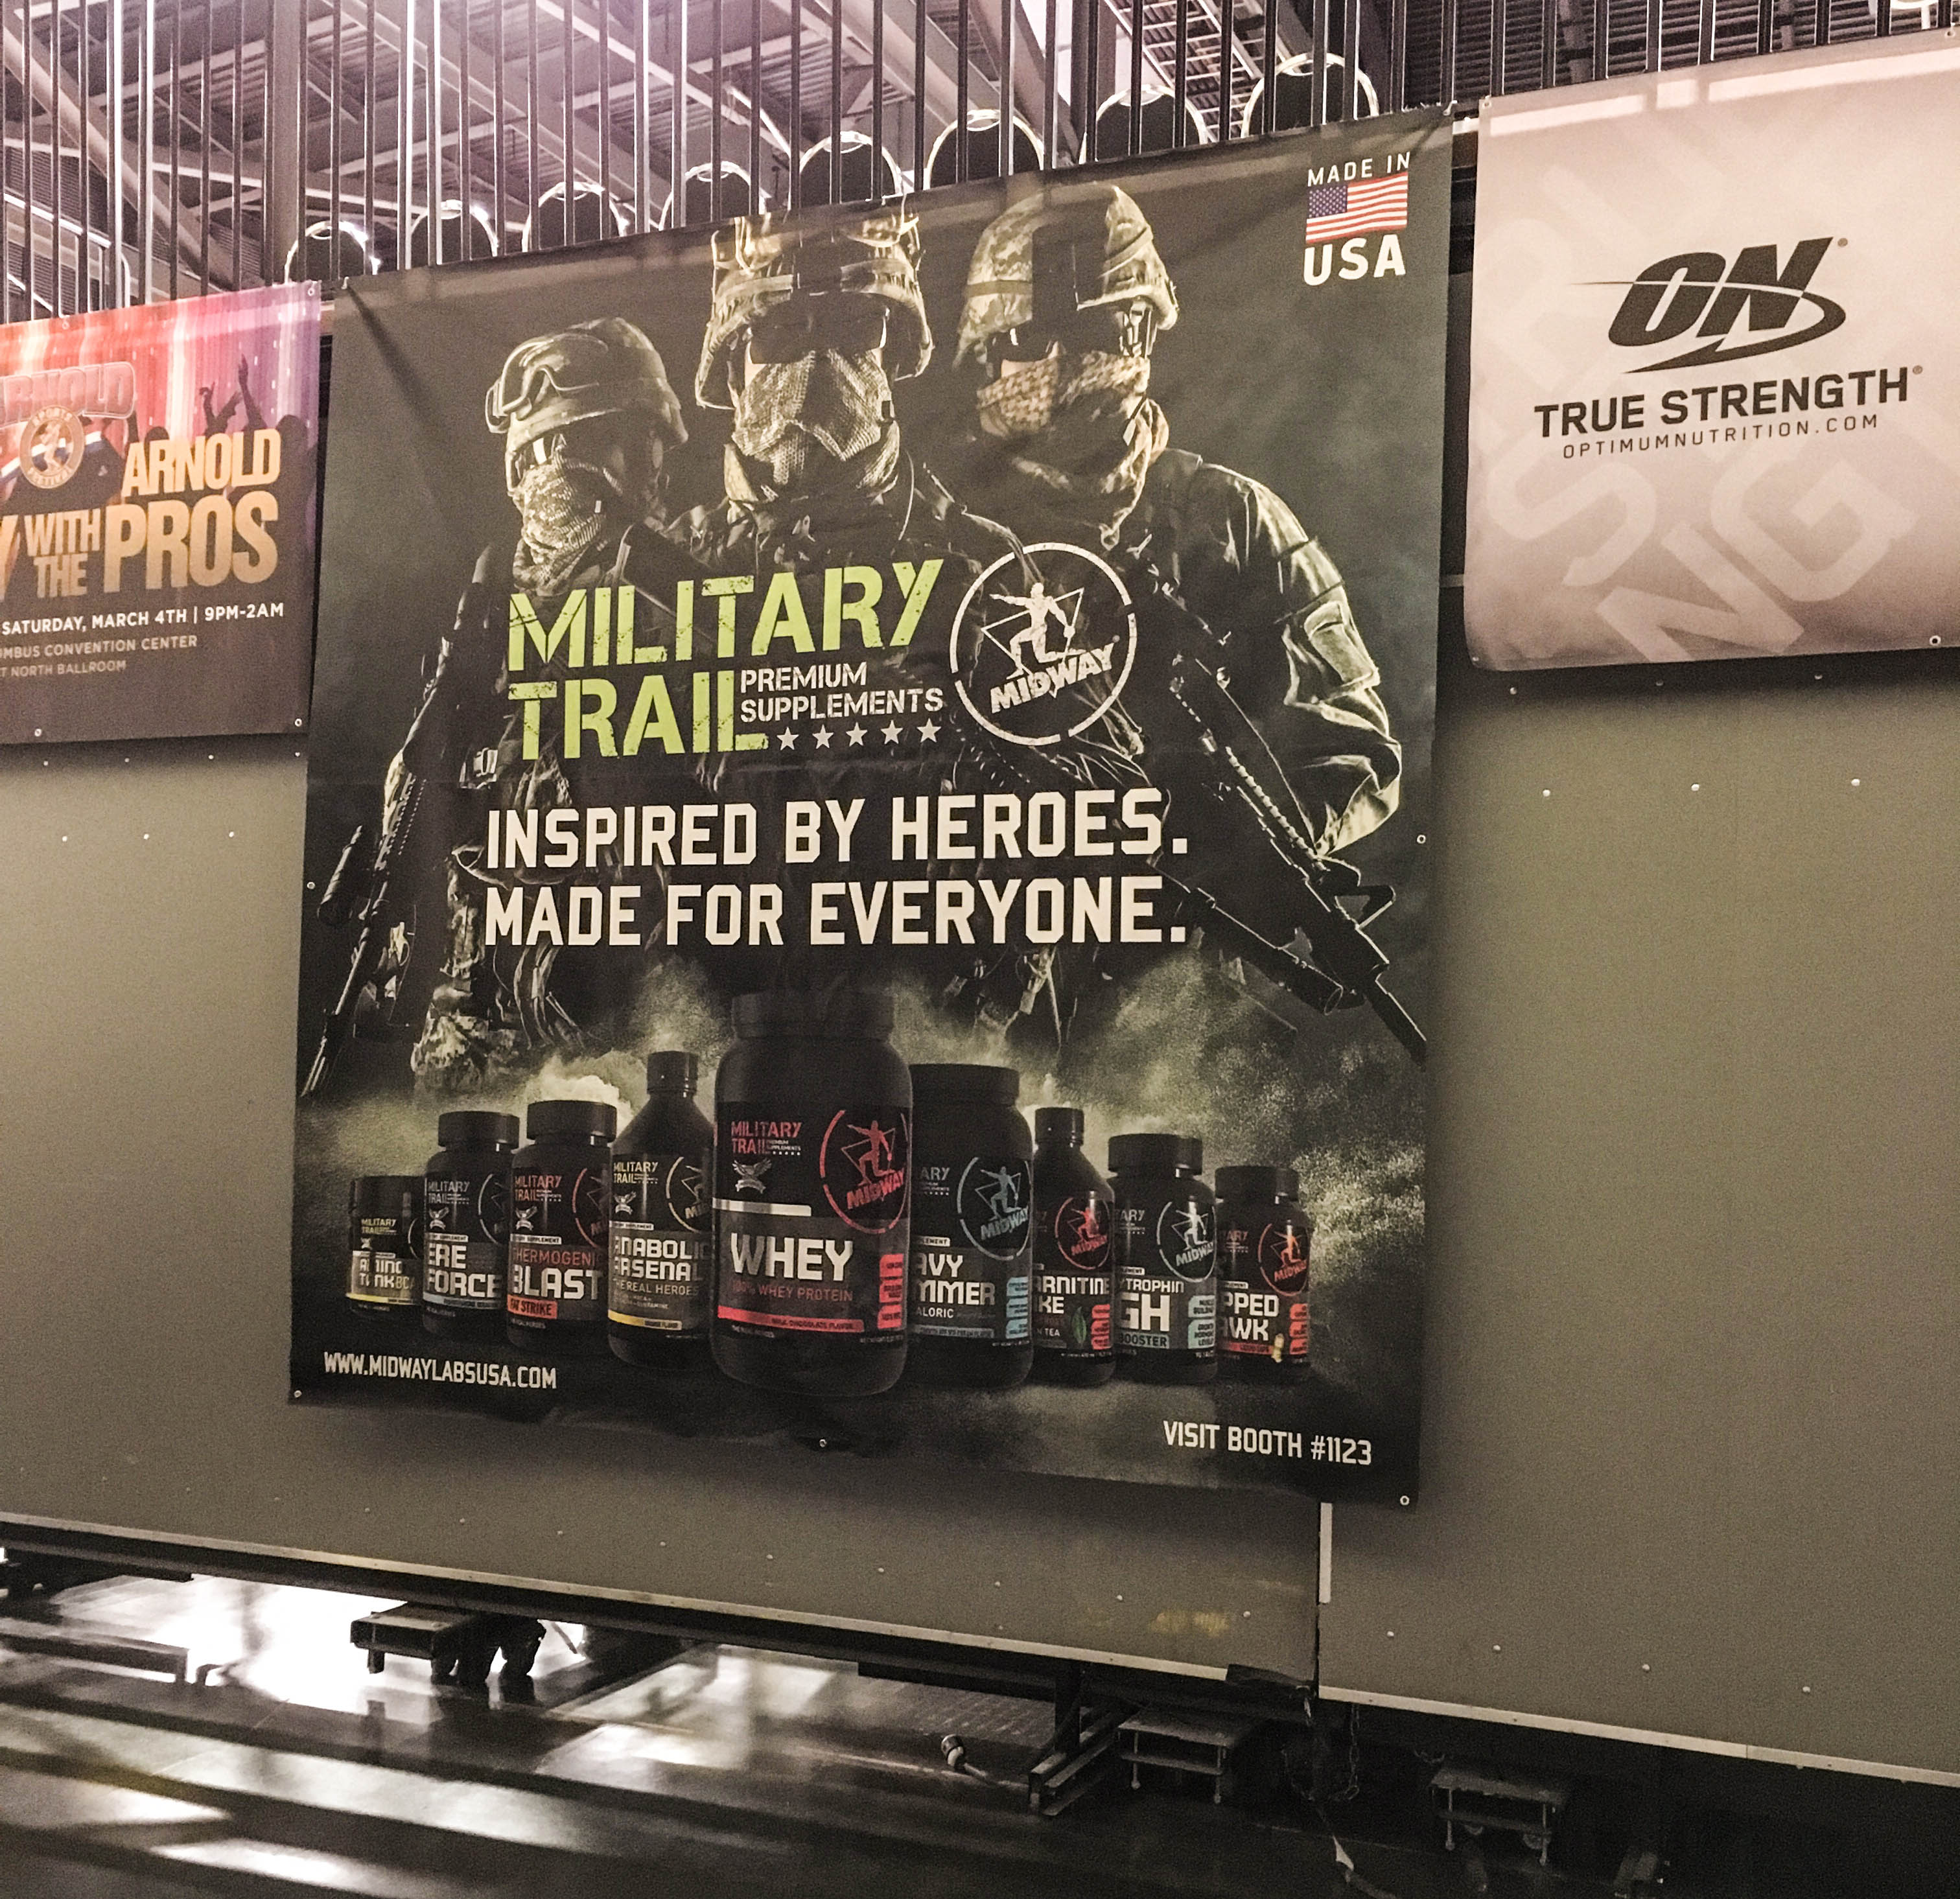 Military Trail Product Banner on Display at The Arnold.